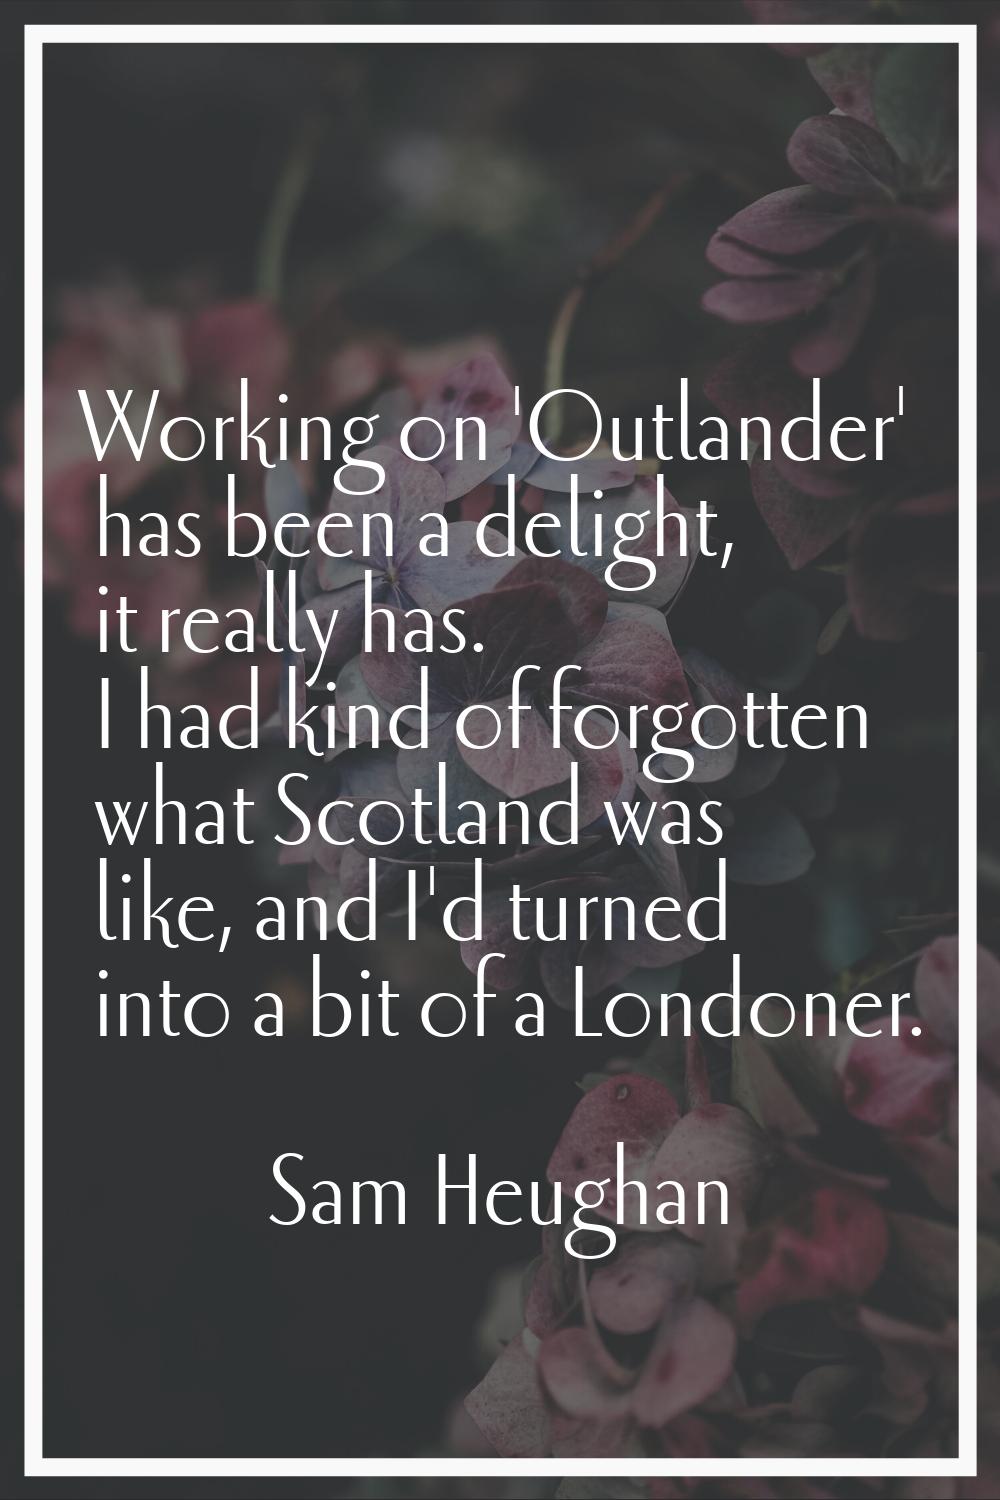 Working on 'Outlander' has been a delight, it really has. I had kind of forgotten what Scotland was